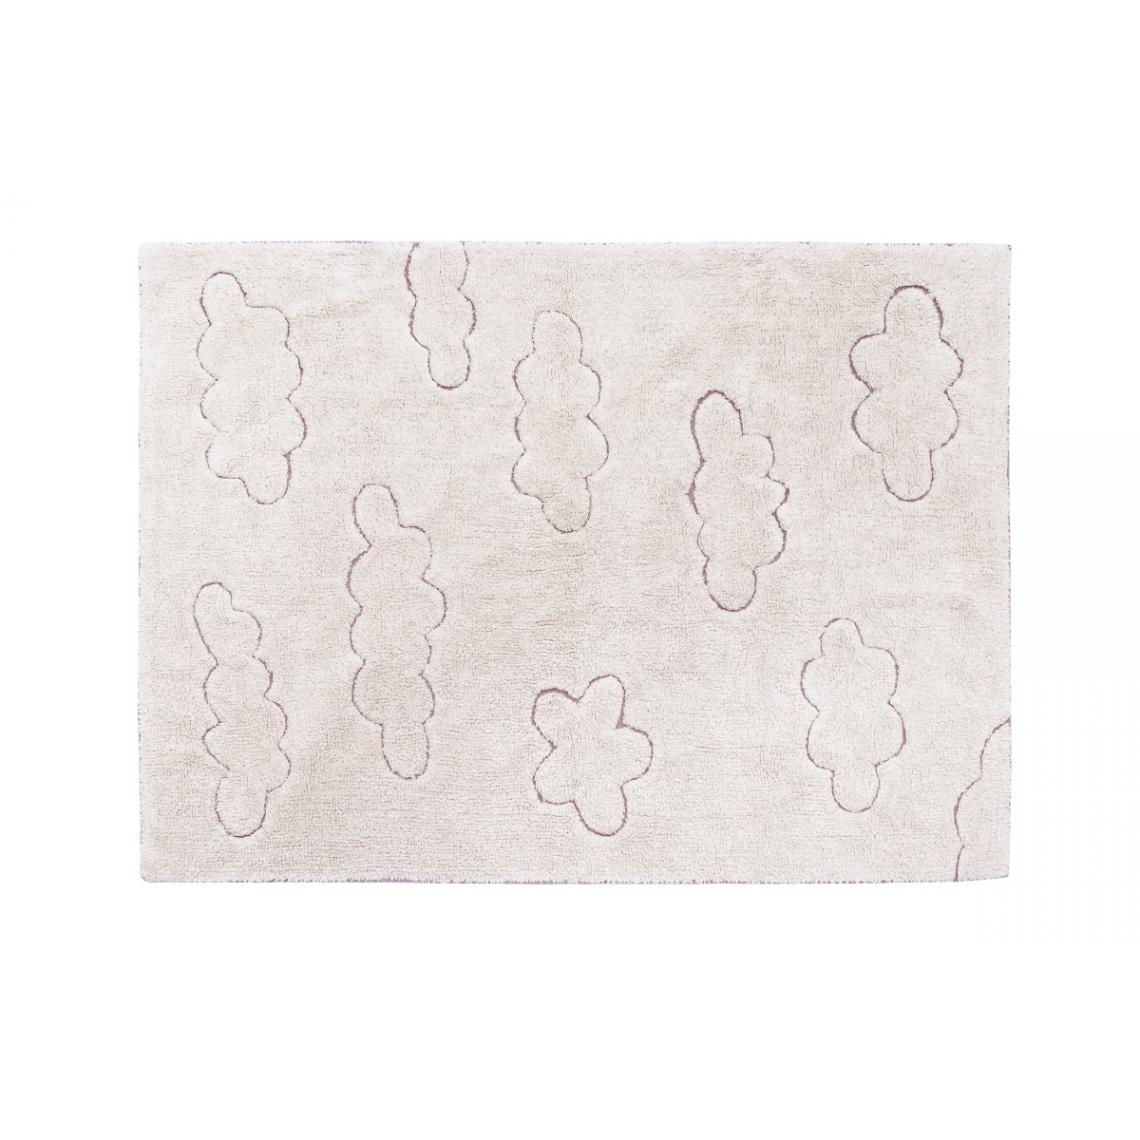 Lorena Canals - Tapis lavable RugCycled Clouds - Tapis